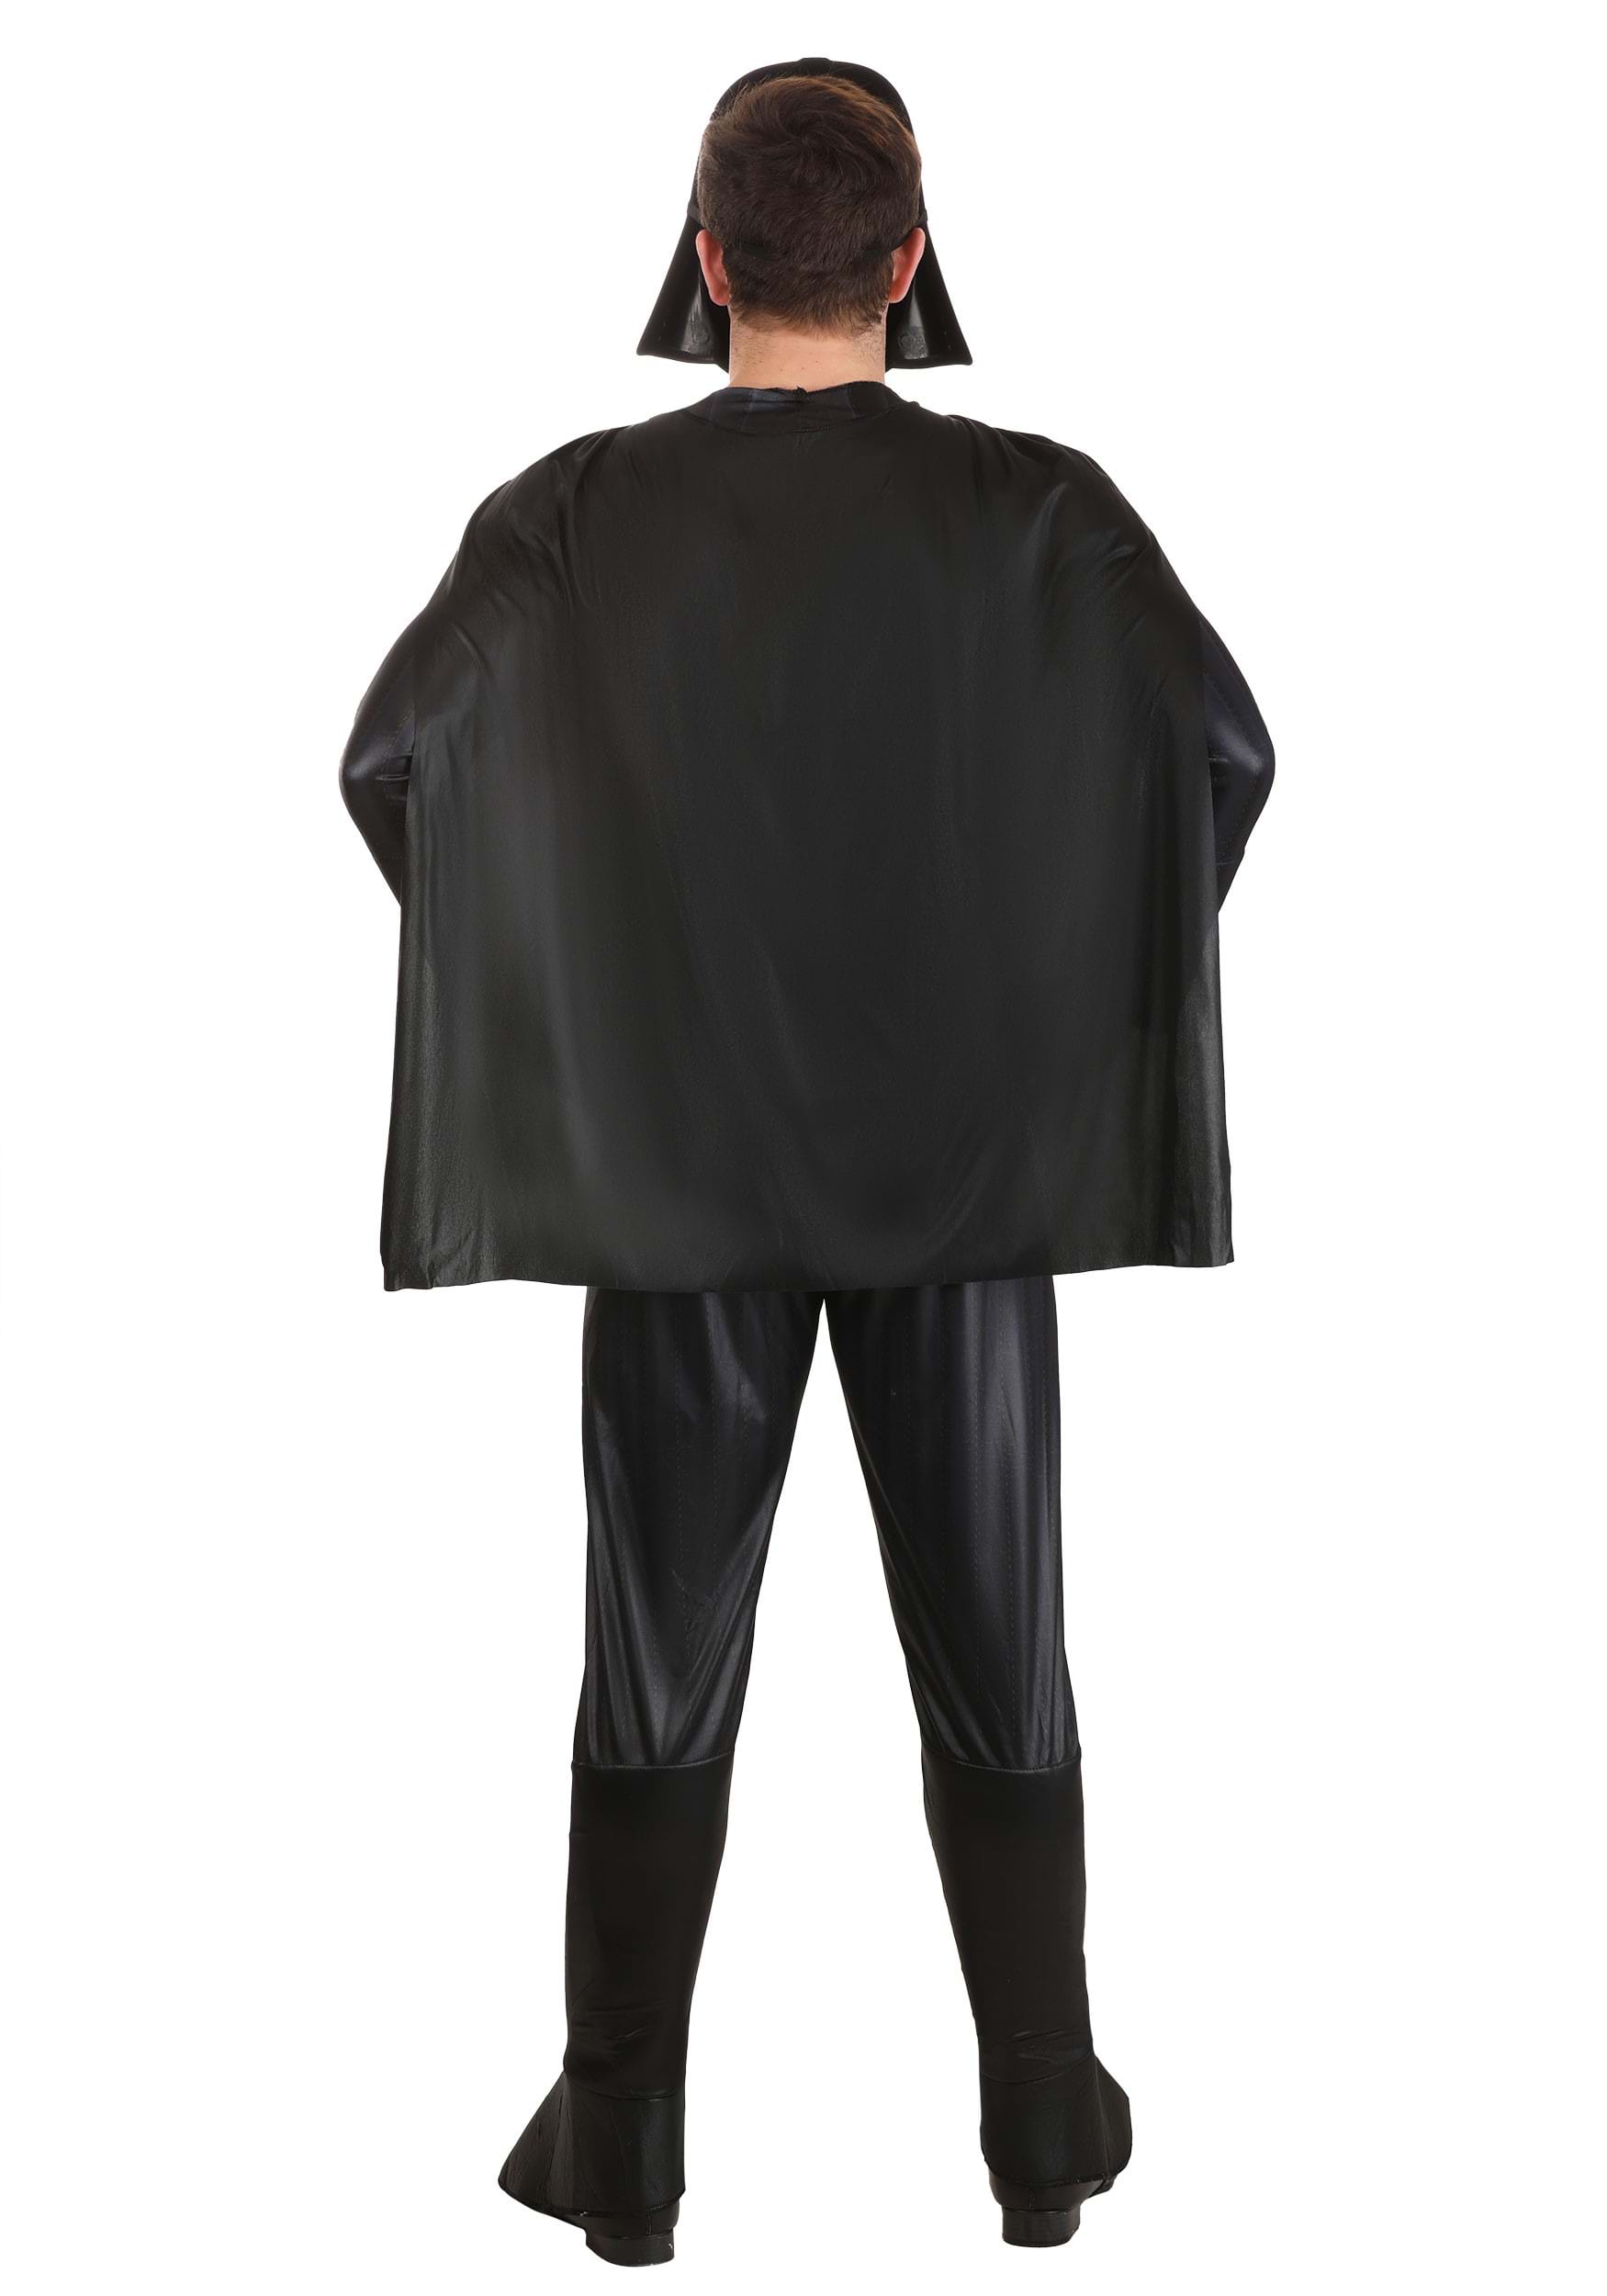 Darth Vader Fancy Dress Costume For Adults